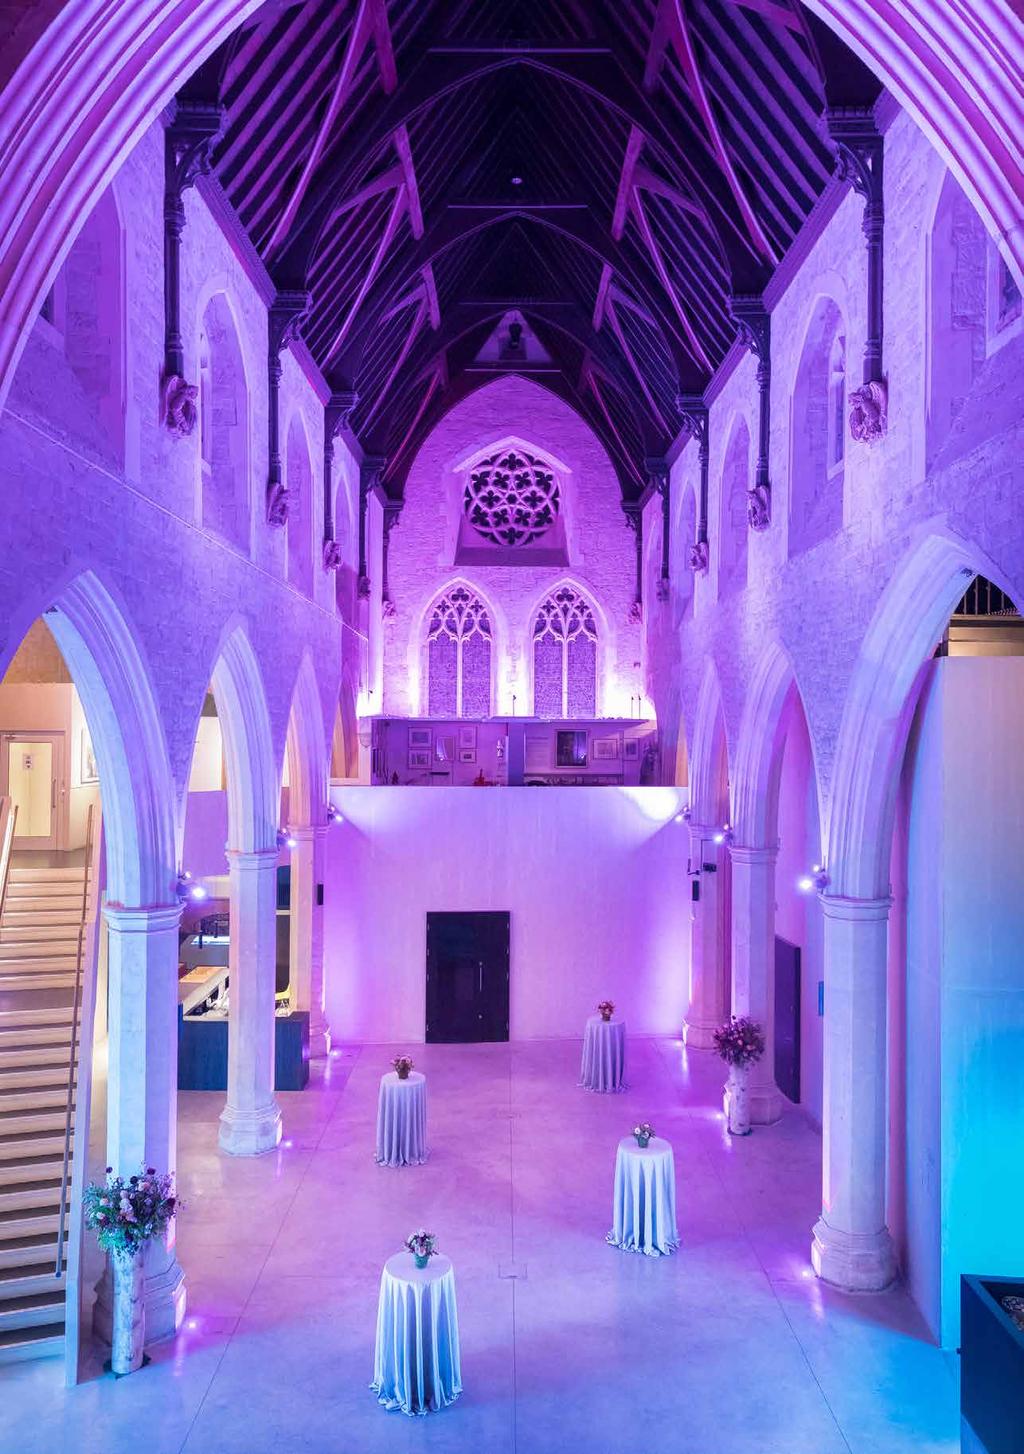 With its soaring pillars, large vaulted ceilings, beautiful stained glass windows and the marriage of traditional and contemporary